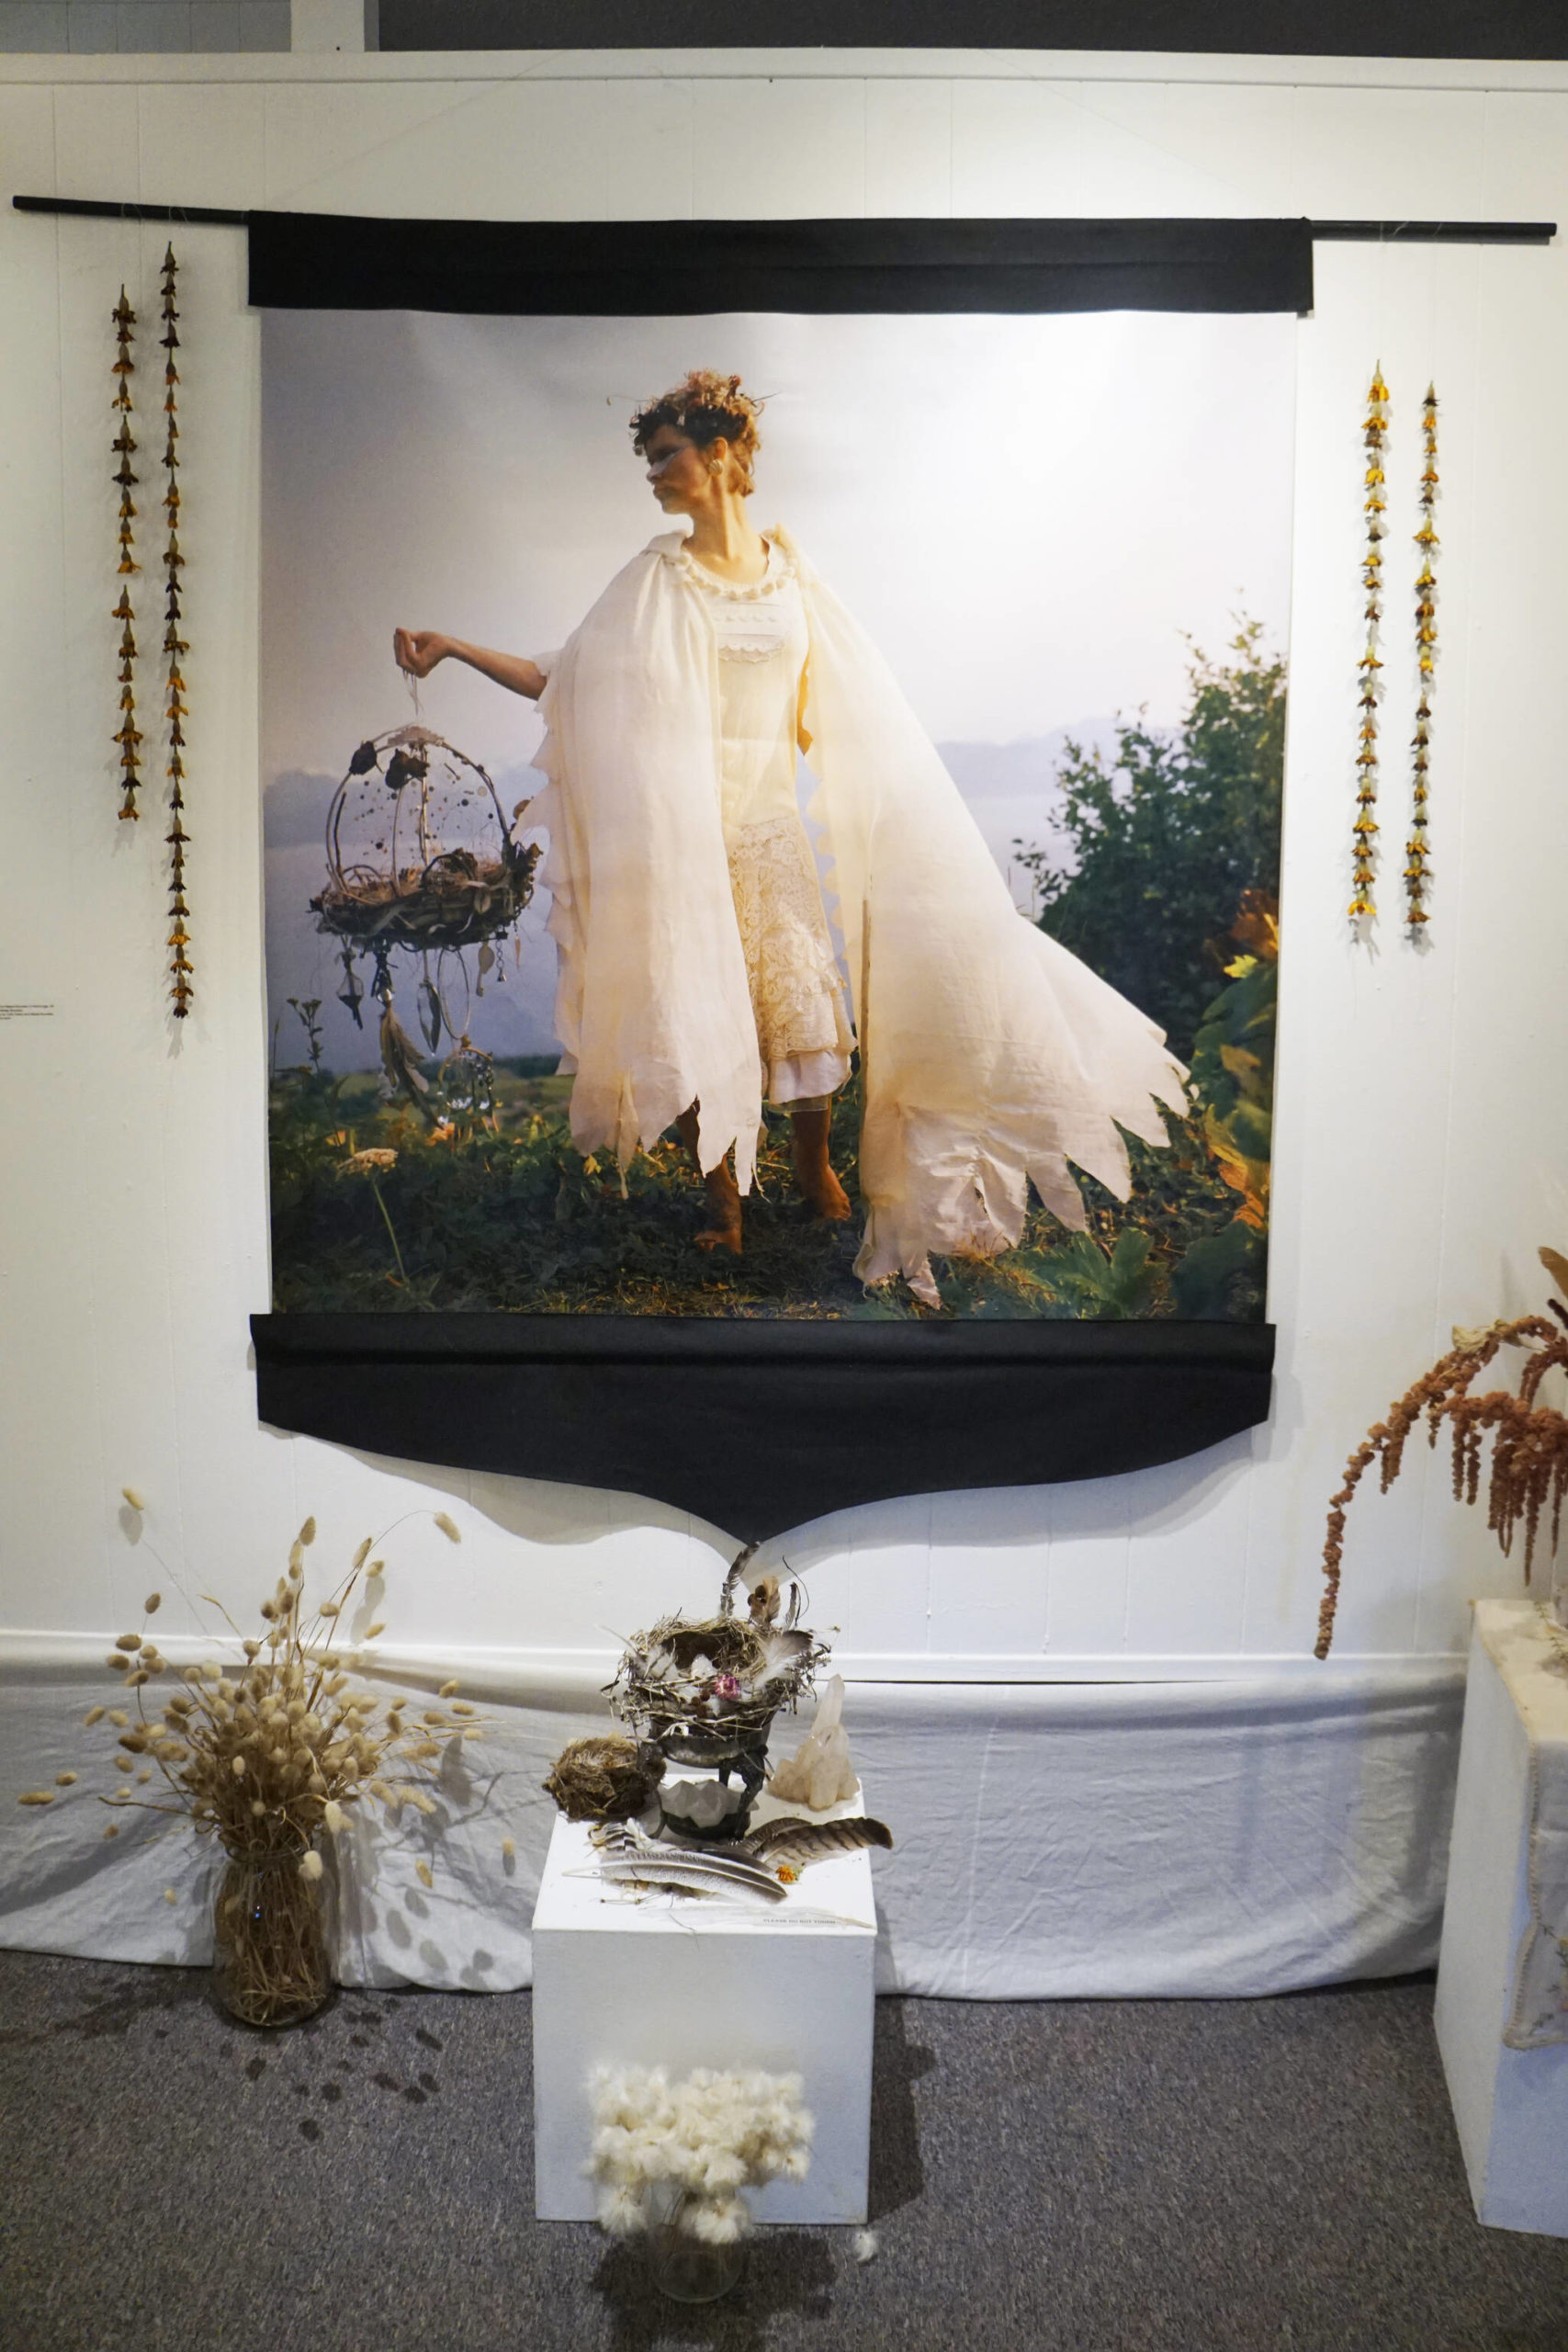 Carly Garay’s “Air” is one of the works in her “The Art of Ancestor Veneration,” on display through Oct. 30, 2021, at the Homer Council on the Arts in Homer, Alaska. (Photo by Michael Armstrong/Homer News)